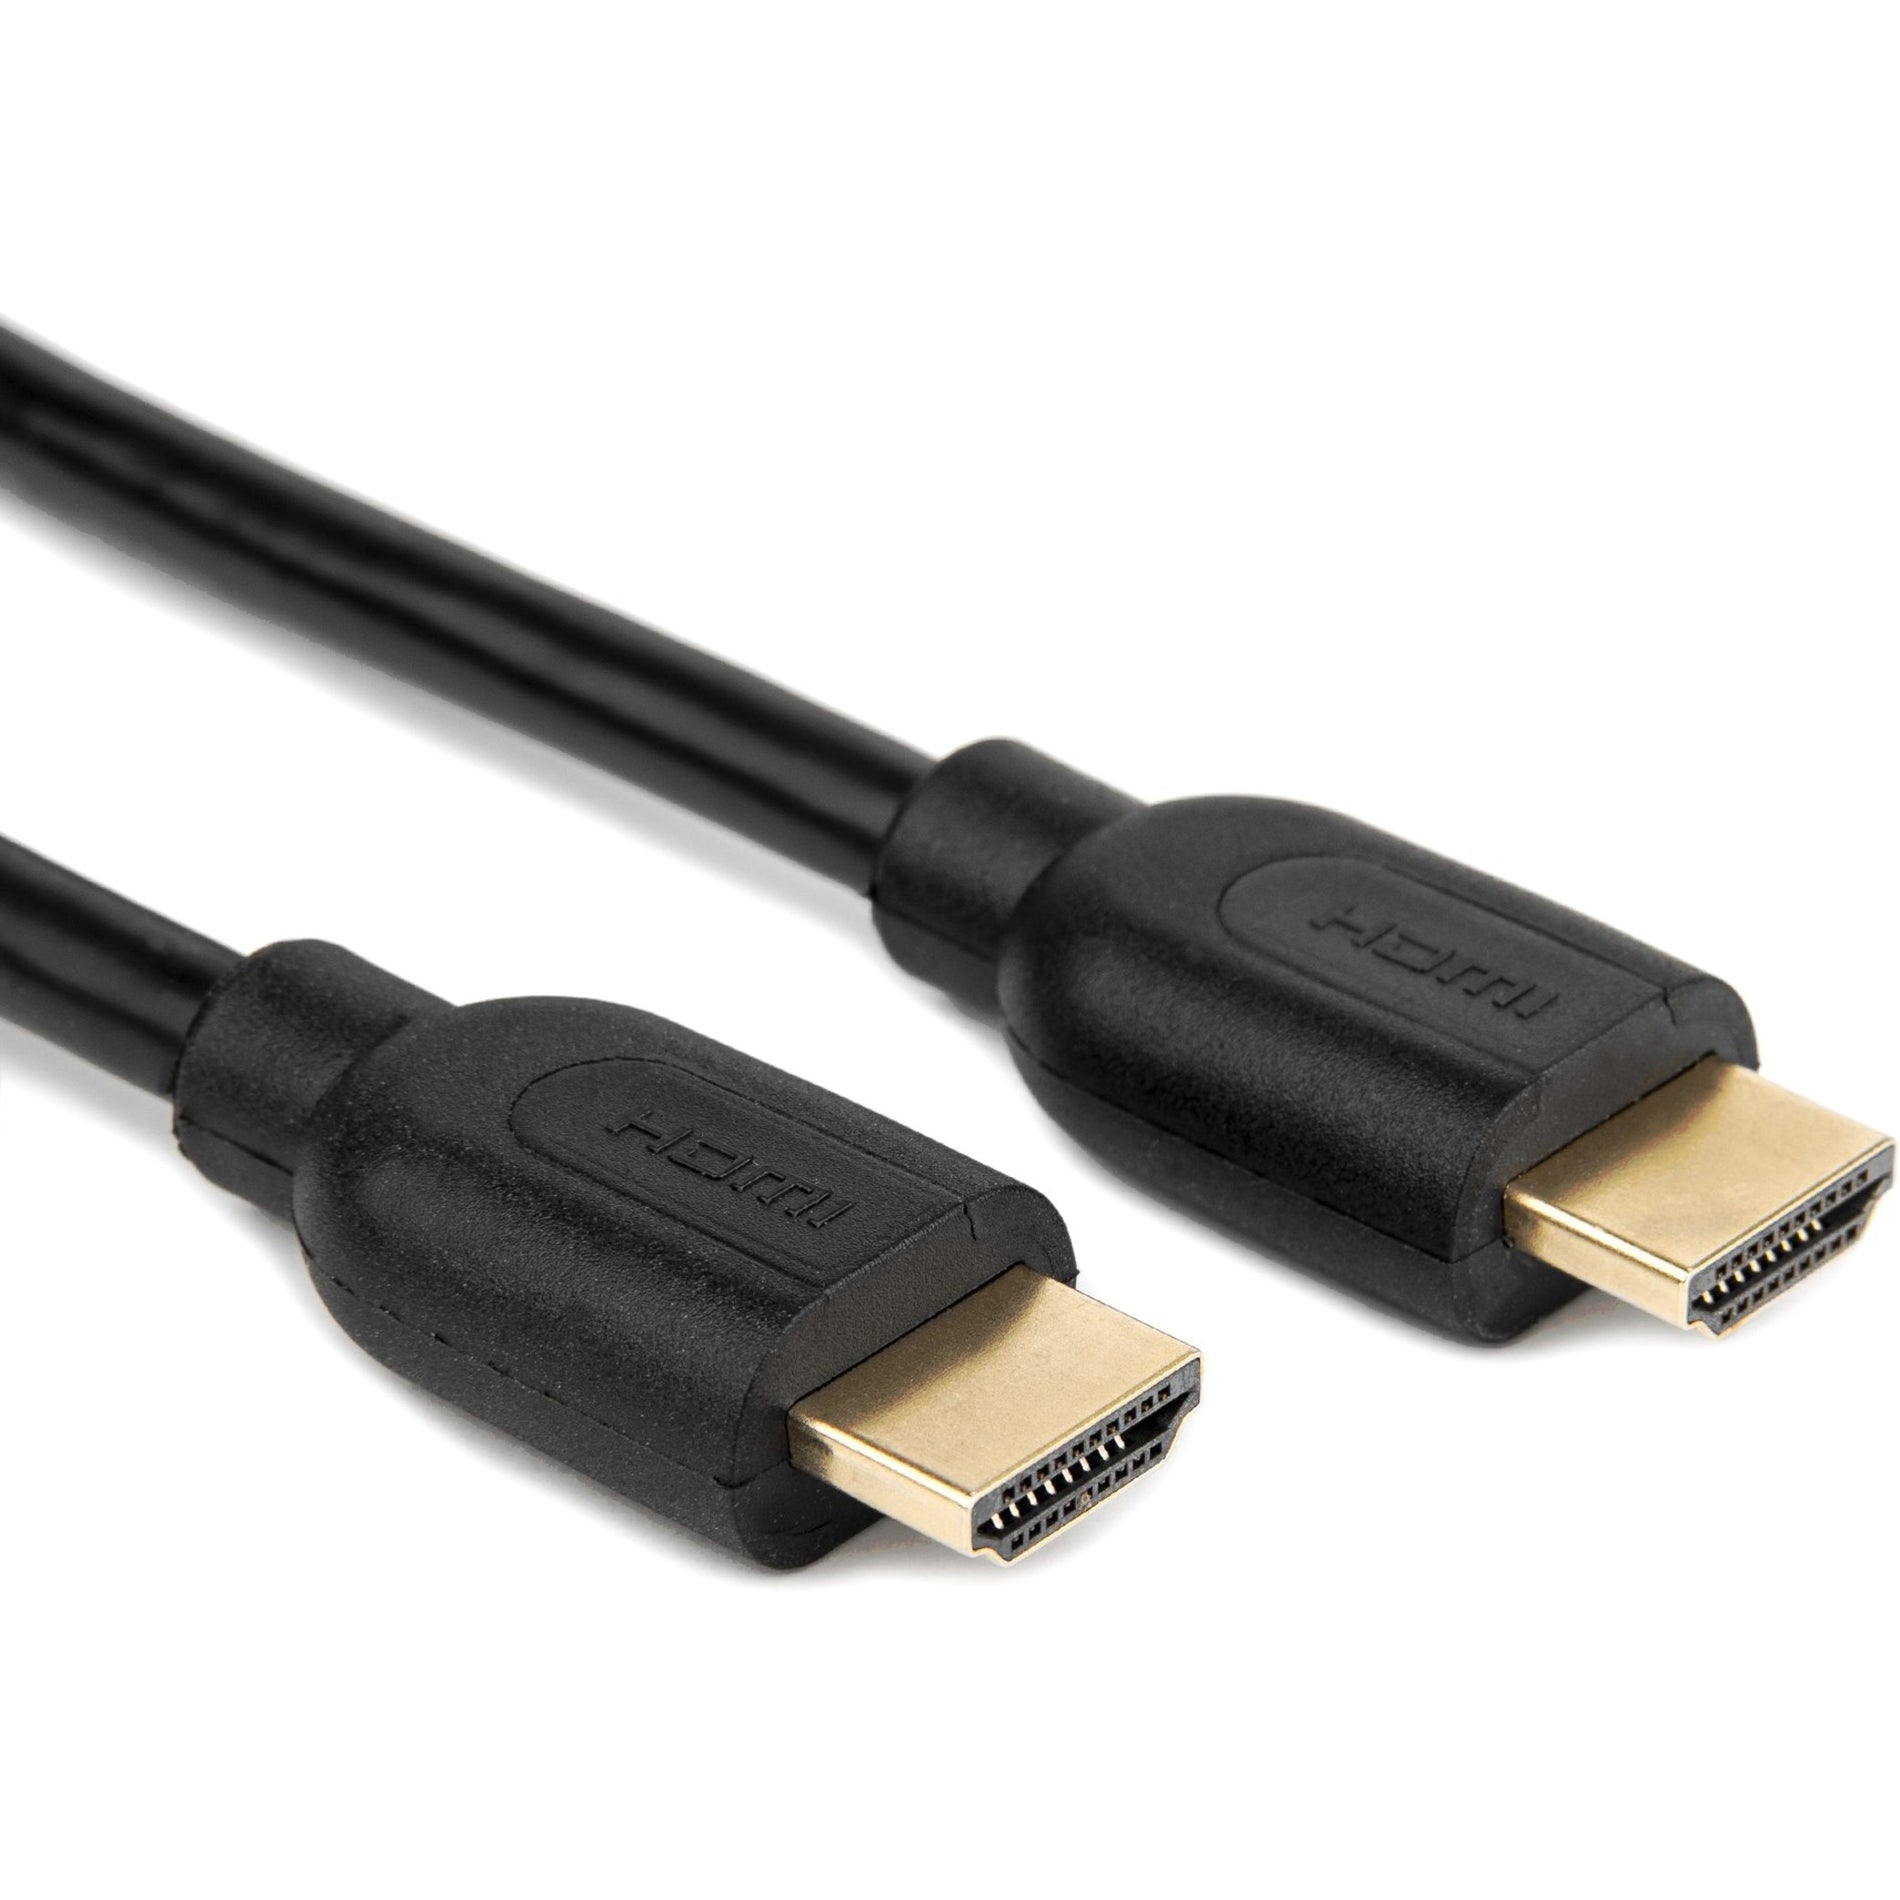 Rocstor Y10C107-B1 Premium High Speed HDMI Cable with Ethernet, 6ft, Gold-Plated Connectors, 10.2 Gbit/s Data Transfer Rate